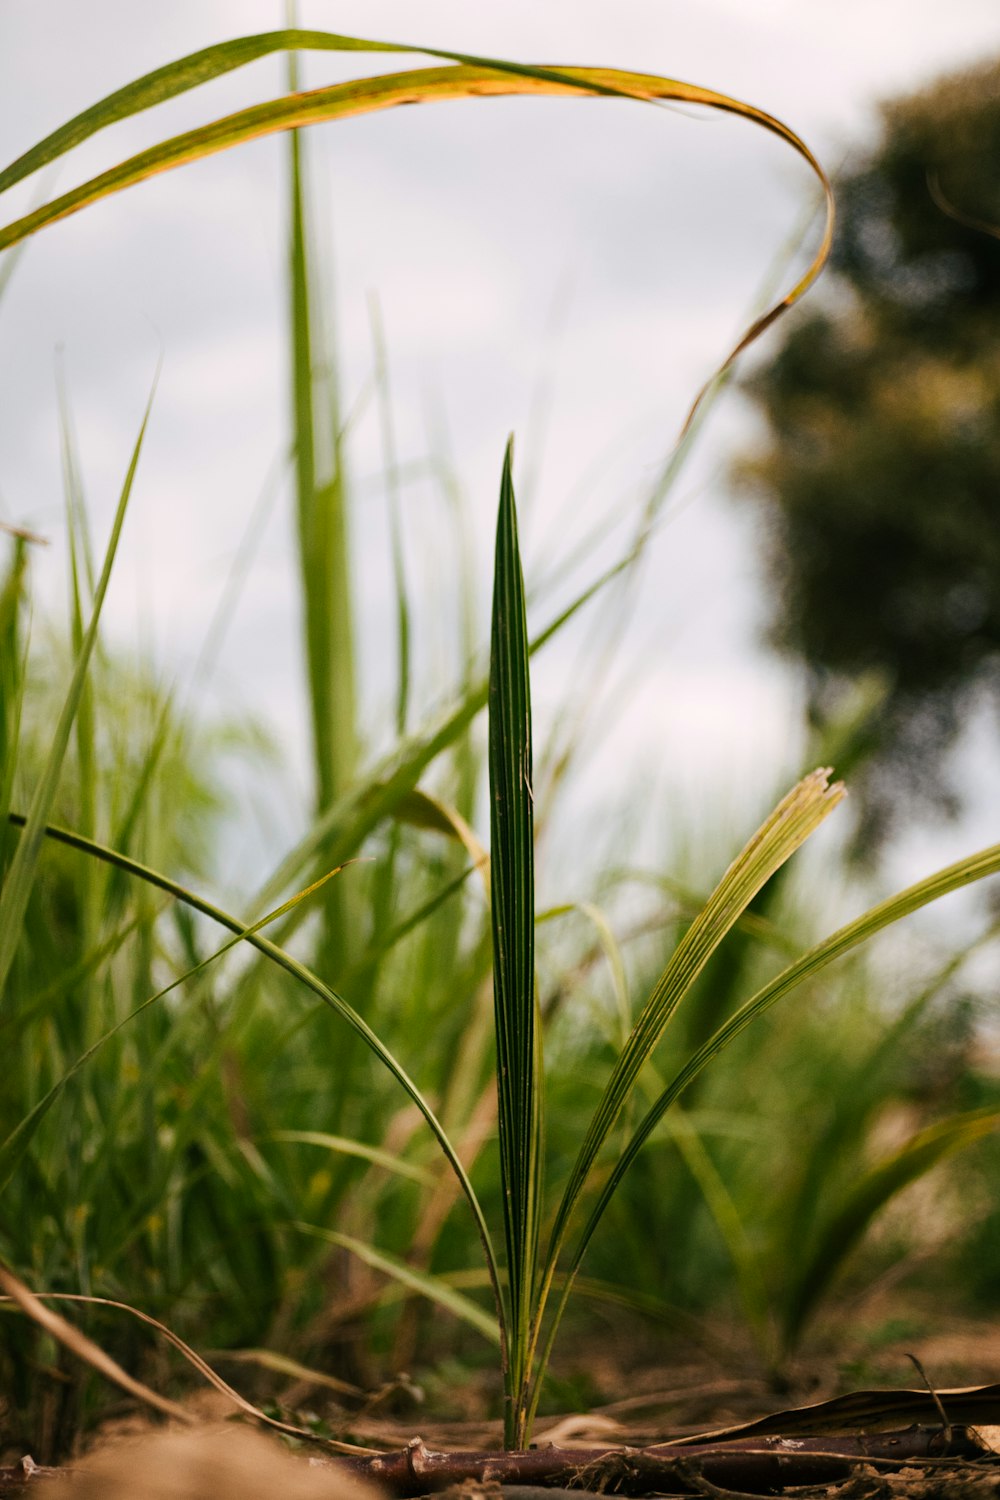 a close up of a grass plant with a sky in the background